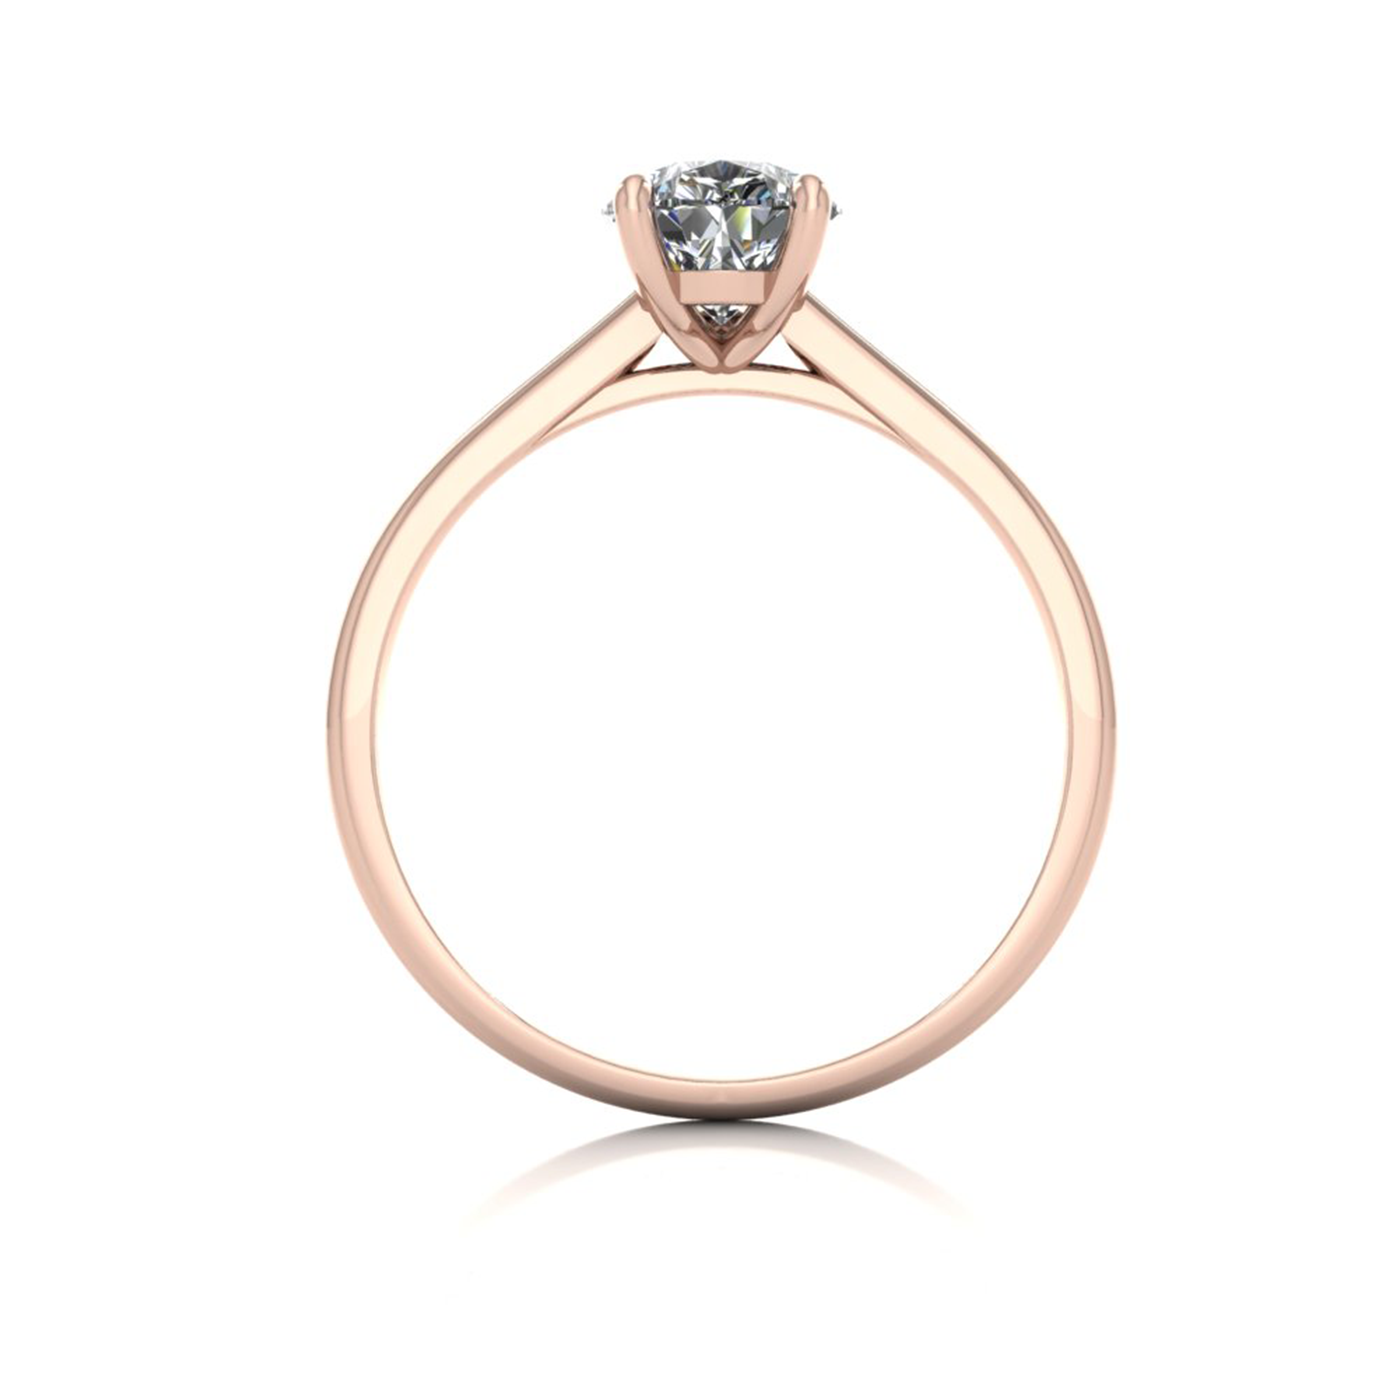 18k rose gold  1,20 ct 3 prongs solitaire pear cut diamond engagement ring with whisper thin band